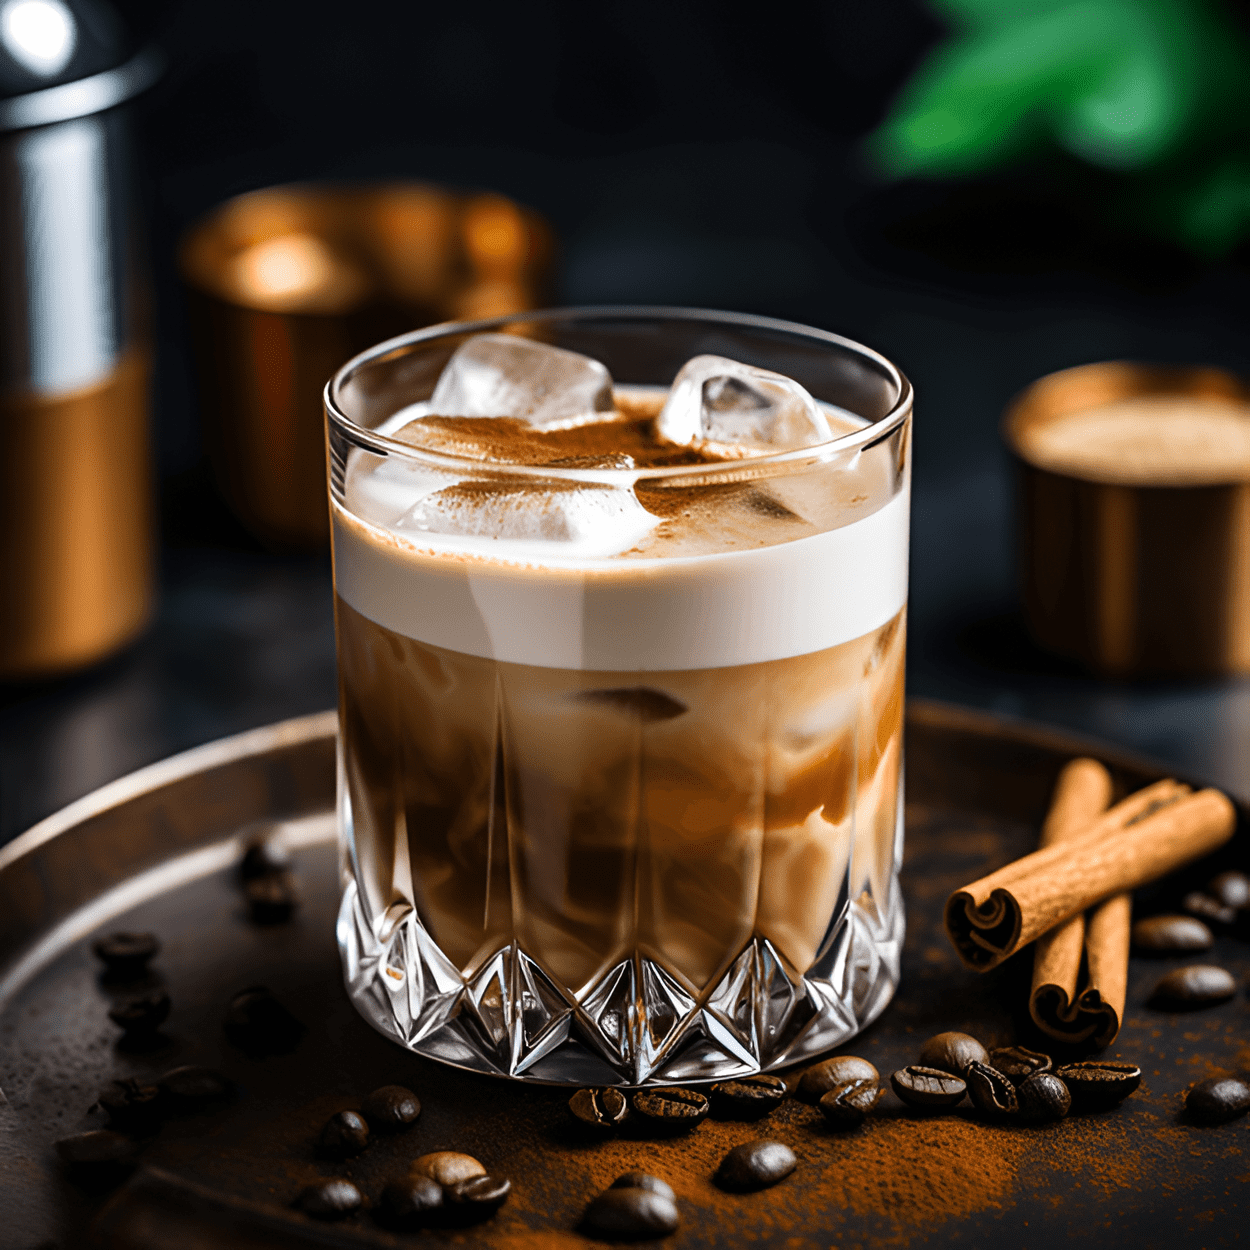 Chai White Russian Cocktail Recipe - The Chai White Russian is creamy, spicy, and slightly sweet. The chai tea adds a warming spice that balances out the sweetness of the cream and coffee liqueur. The vodka gives it a strong kick, making it a potent, yet comforting drink.